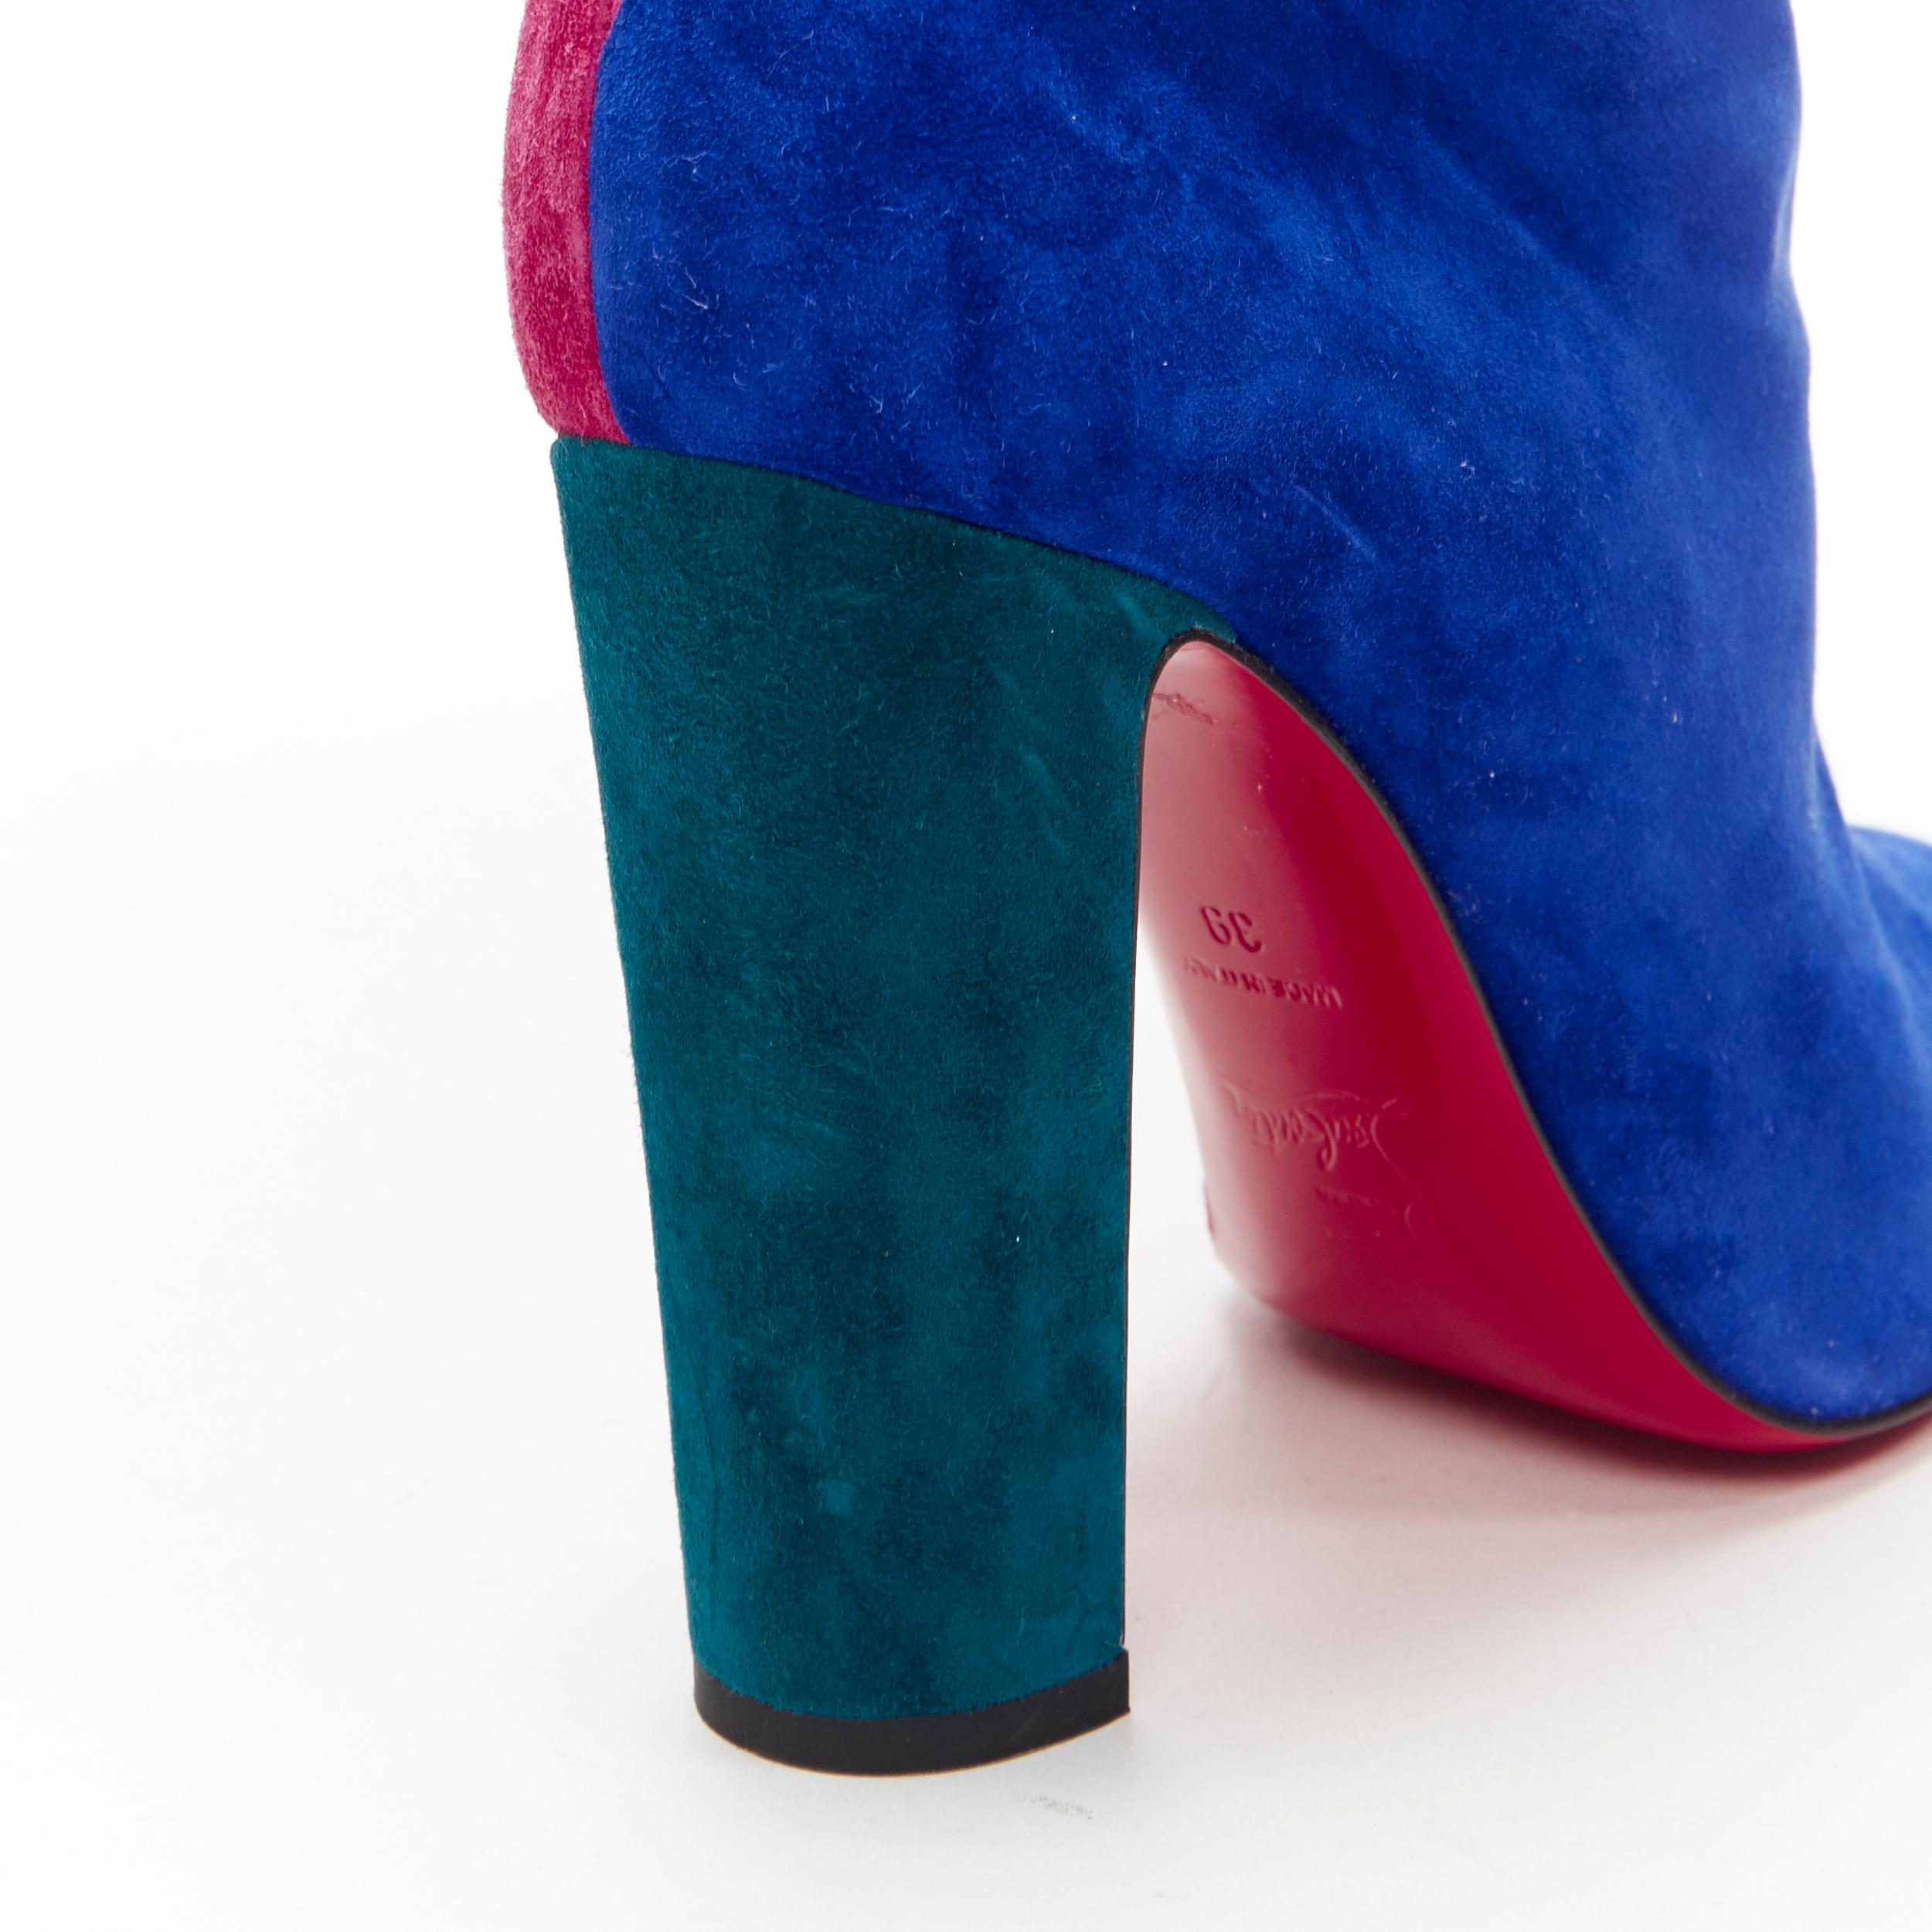 new CHRISTIAN LOUBOUTIN Botty Double 100 blue pink colorblocked suede booty EU39 1